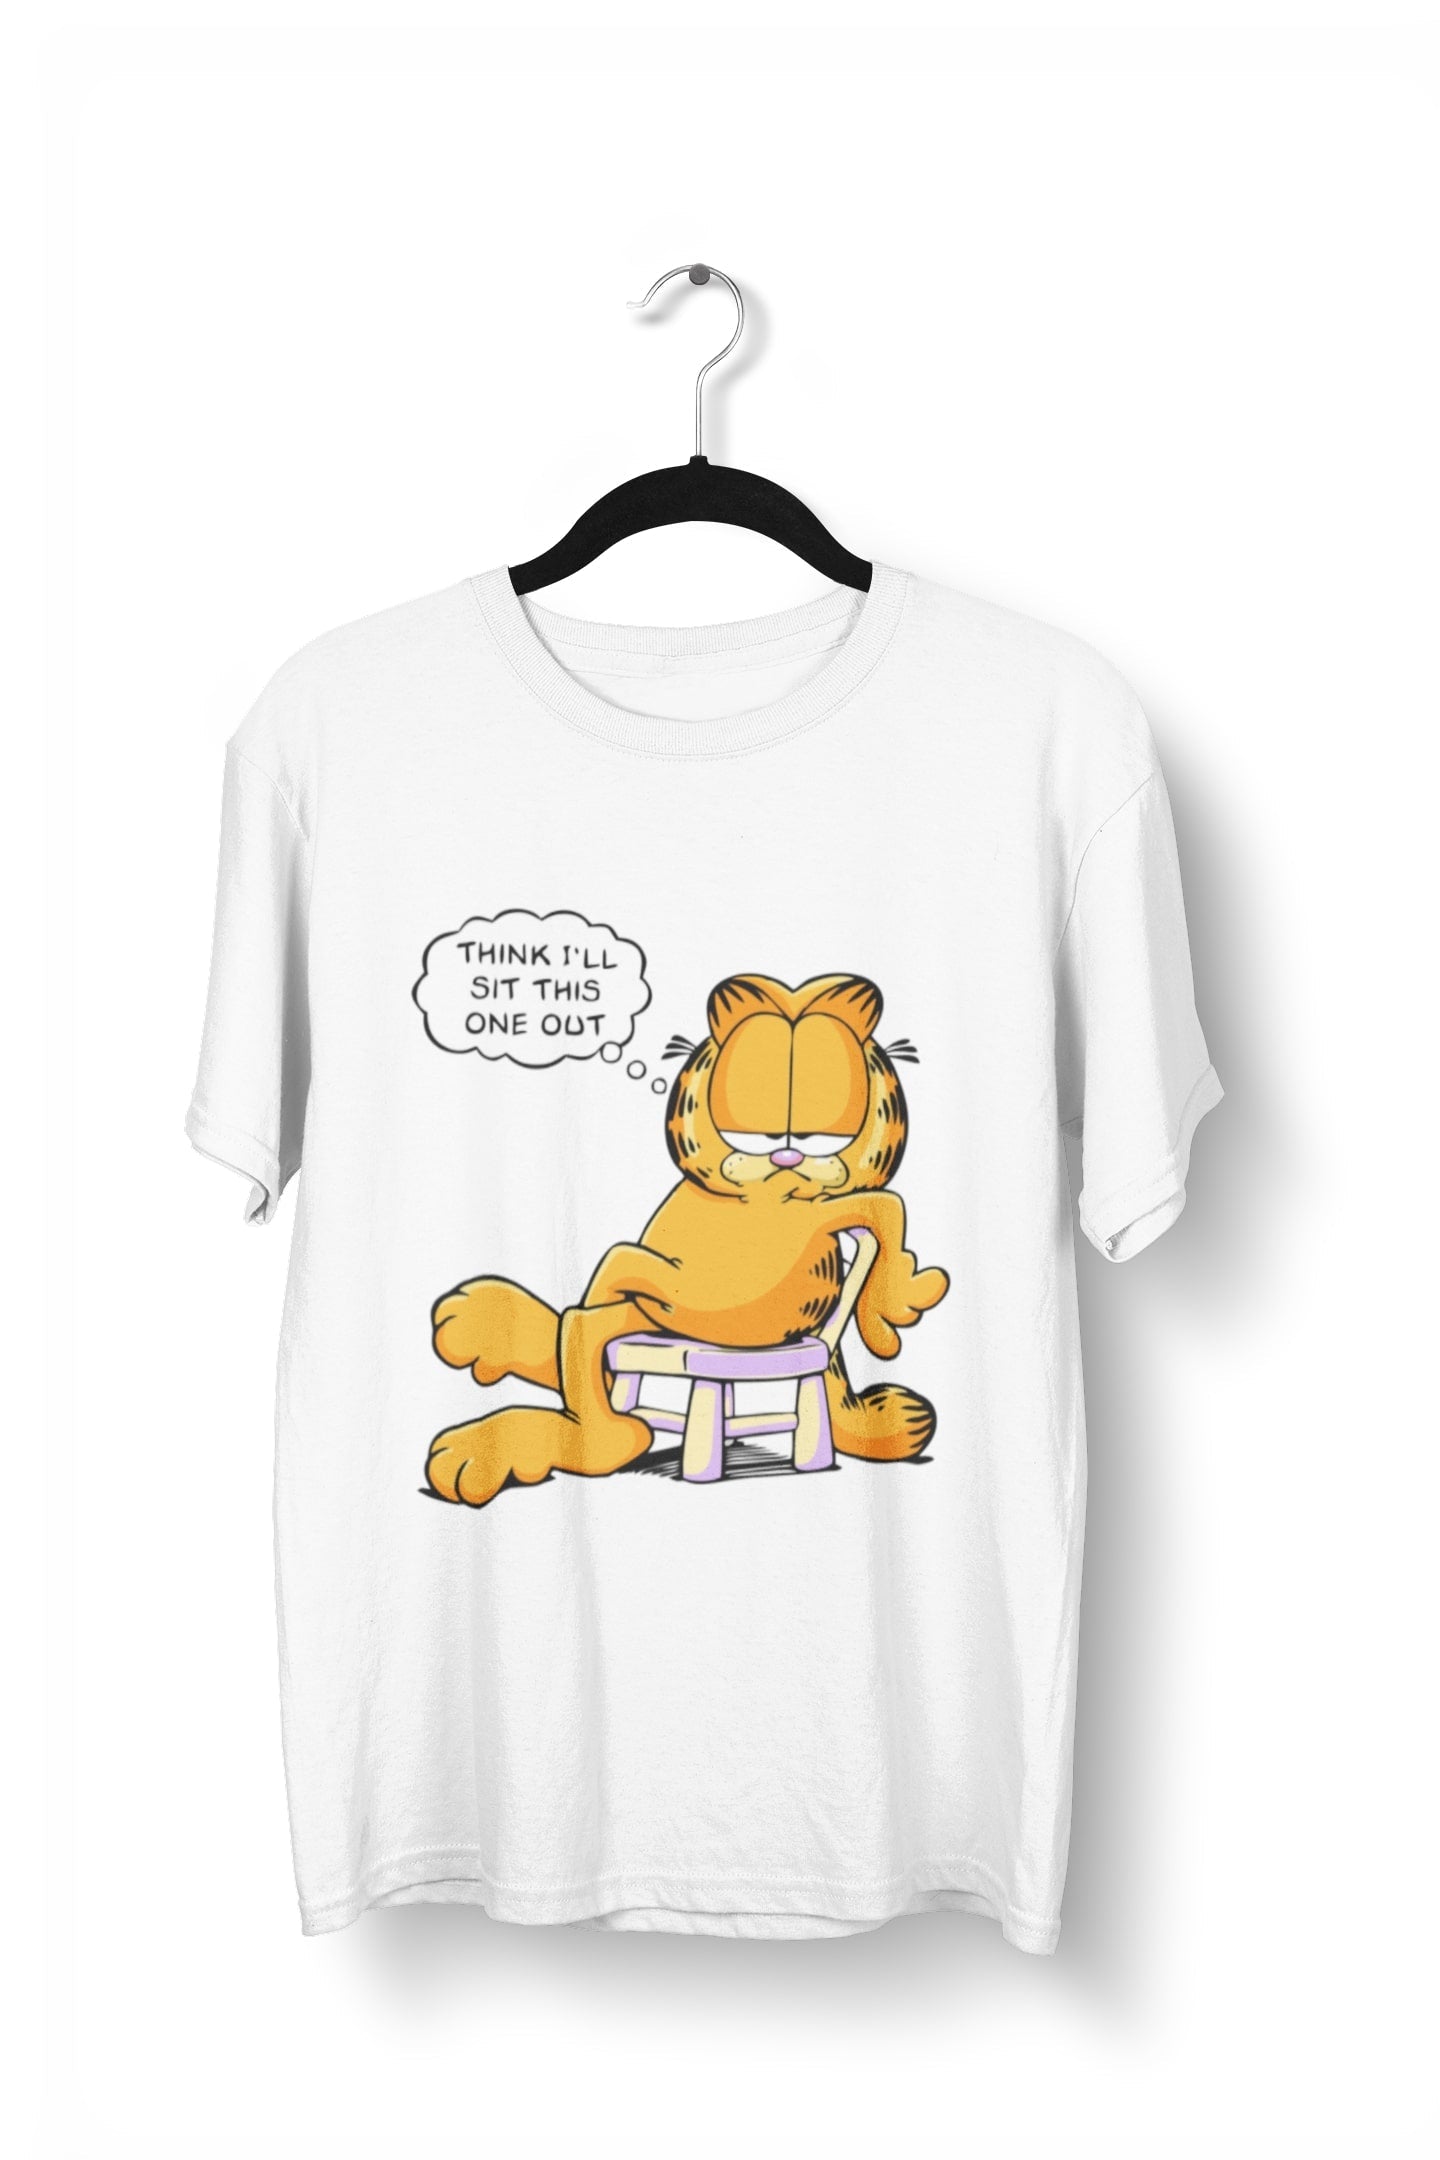 thelegalgang,Garfield - I will Sit This One T shirt for Men,MEN.